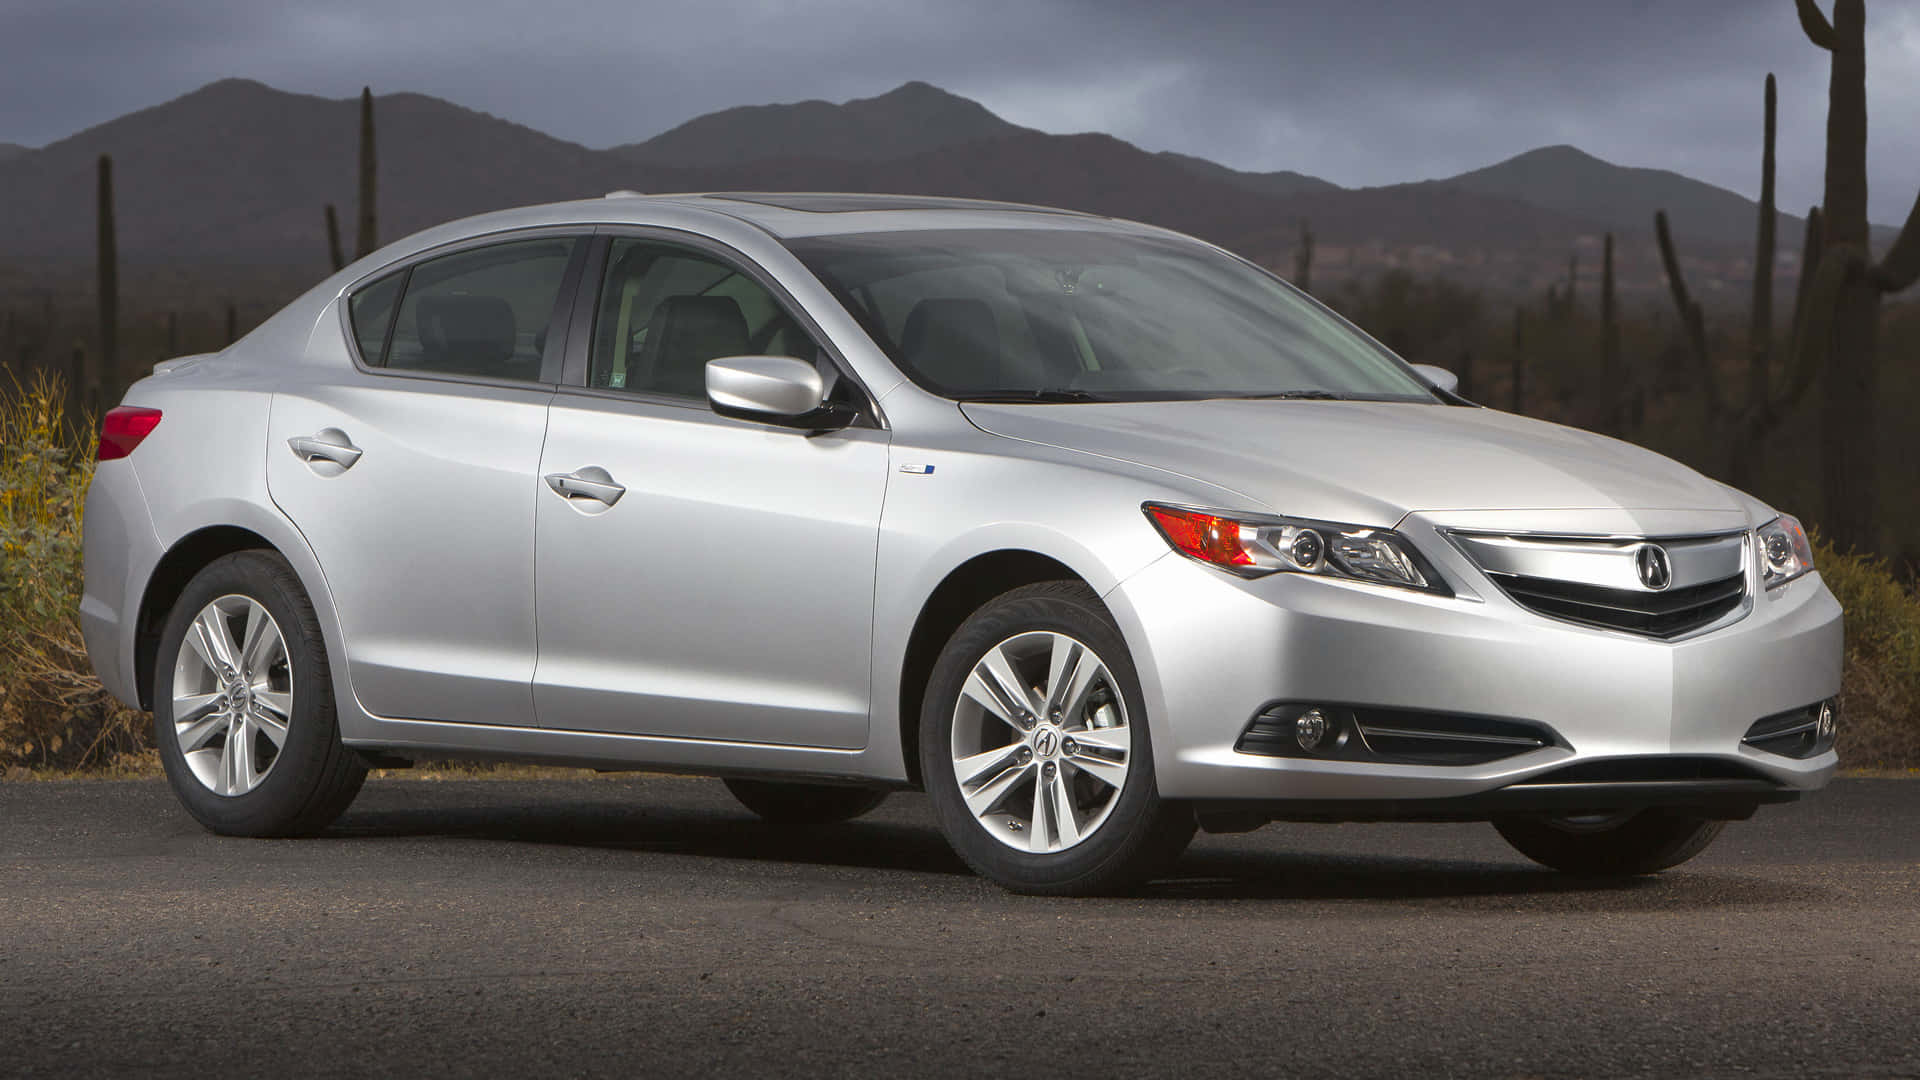 Stunning Acura ILX on the road Wallpaper